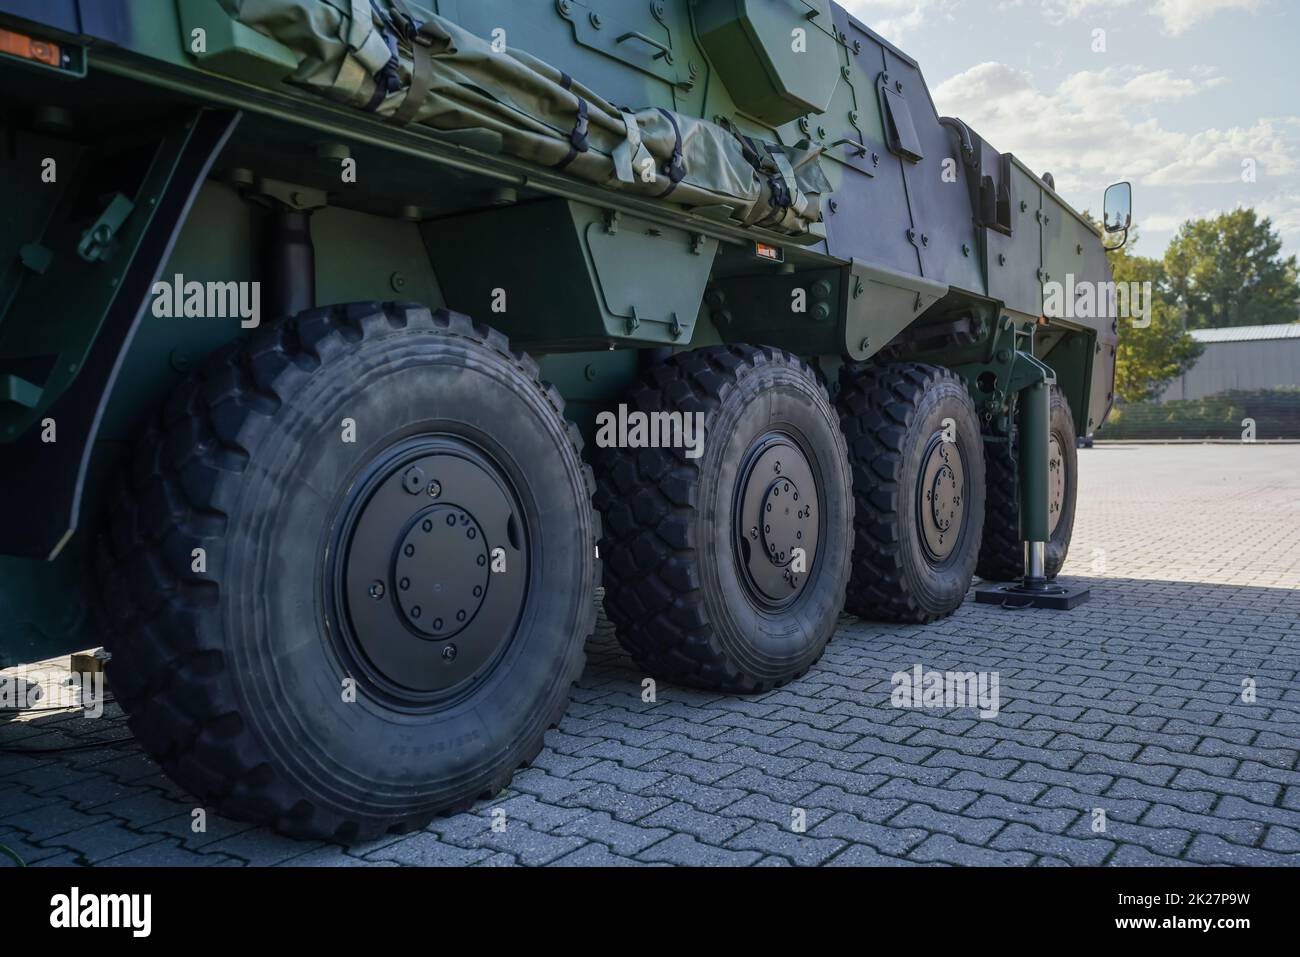 Large military grade tires on green gray army vehicle, closeup detail Stock Photo